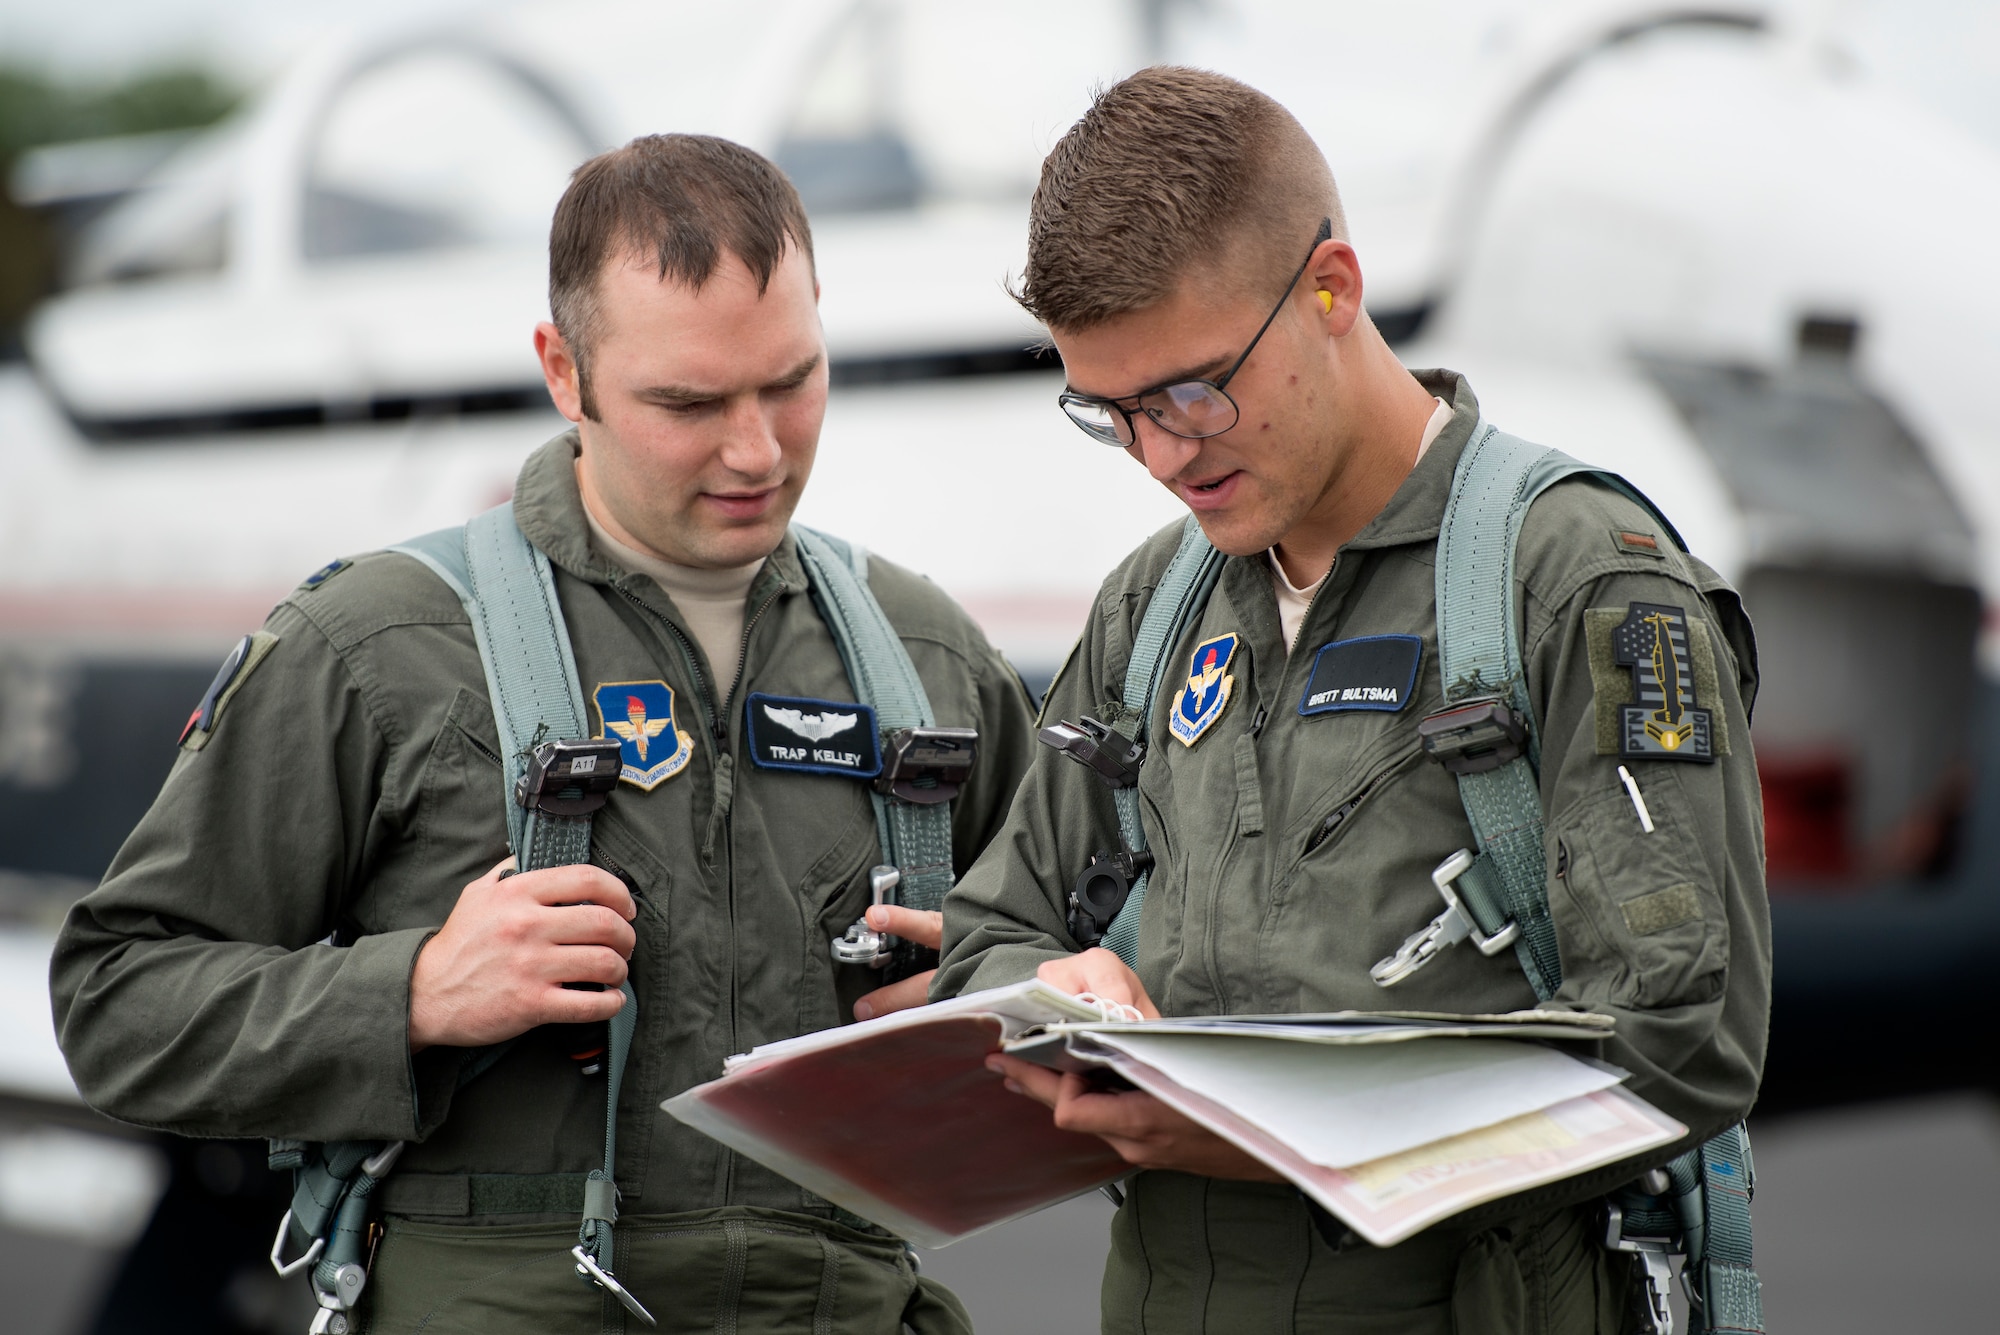 U.S. Air Force Capt. Jeffery Kelley, Pilot Training Next instructor pilot, and 2nd Lt. Brett Bultsma, PTN student, look over the flight plans for their training mission at Austin-Bergstrom International Airport in Austin, Texas June 18, 2018. PTN is an Air Education and Training Command initiative to explore and potentially prototype a training environment that integrates various technologies to produce pilots in an accelerated, cost-efficient, learning-focused manner. Air Education and Training Command officials announced the second iteration of Pilot Training Next would begin in January 2019 during a panel at the 2018 Air Force Association Air, Space and Cyber Conference in National Harbor, Maryland. (U.S. Air Force photo by Sean M. Worrell)